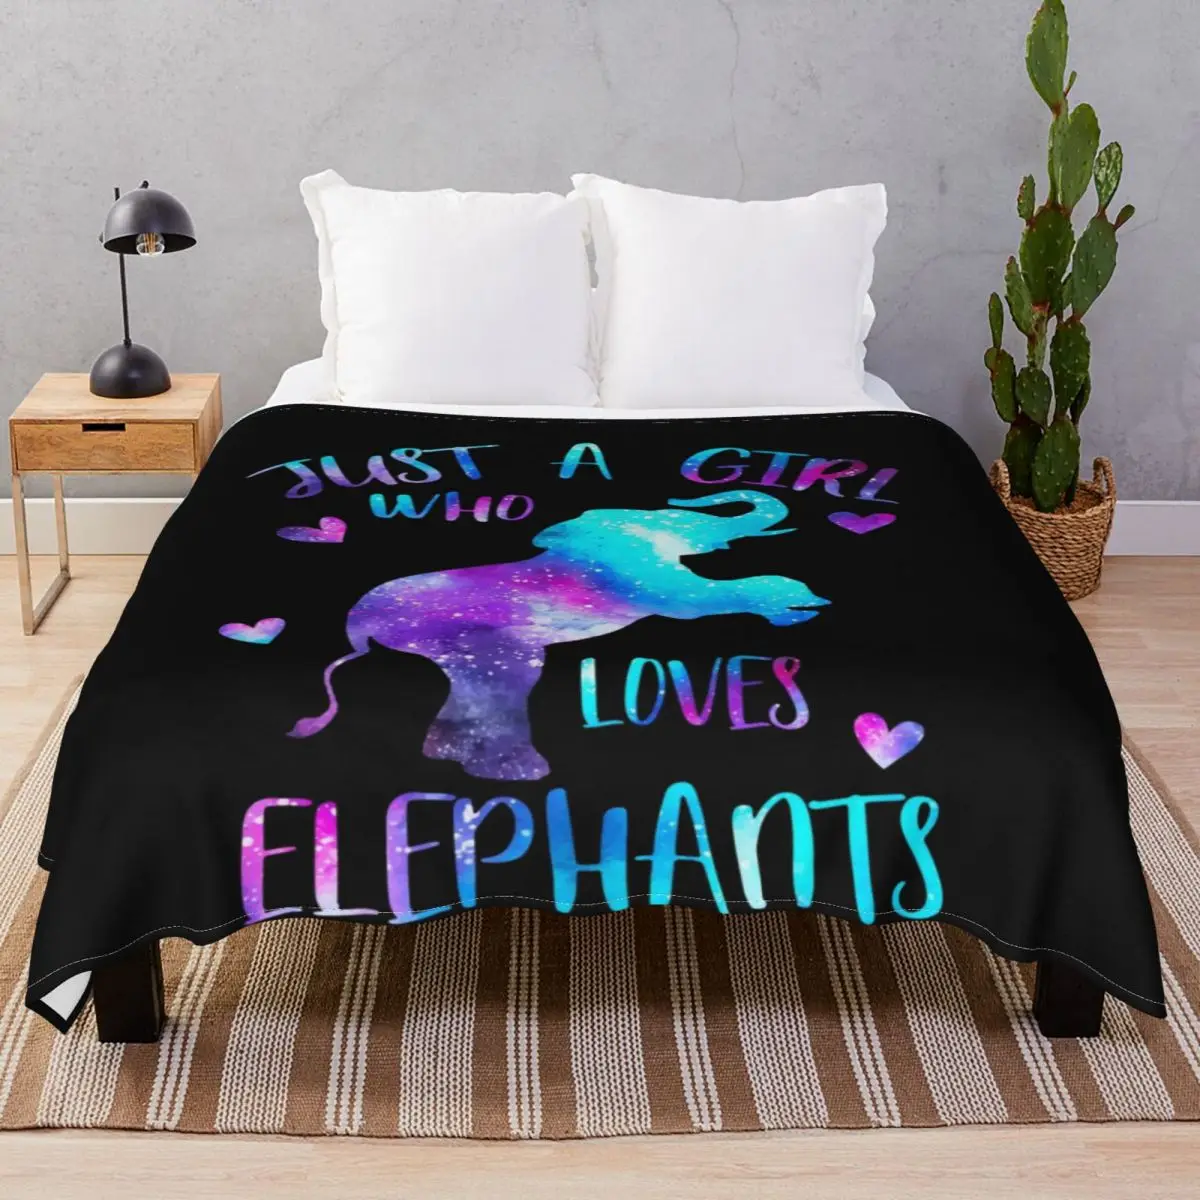 Just A Girl Who Loves Elephants Blanket Velvet Summer Warm Throw Blankets for Bed Home Couch Travel Office